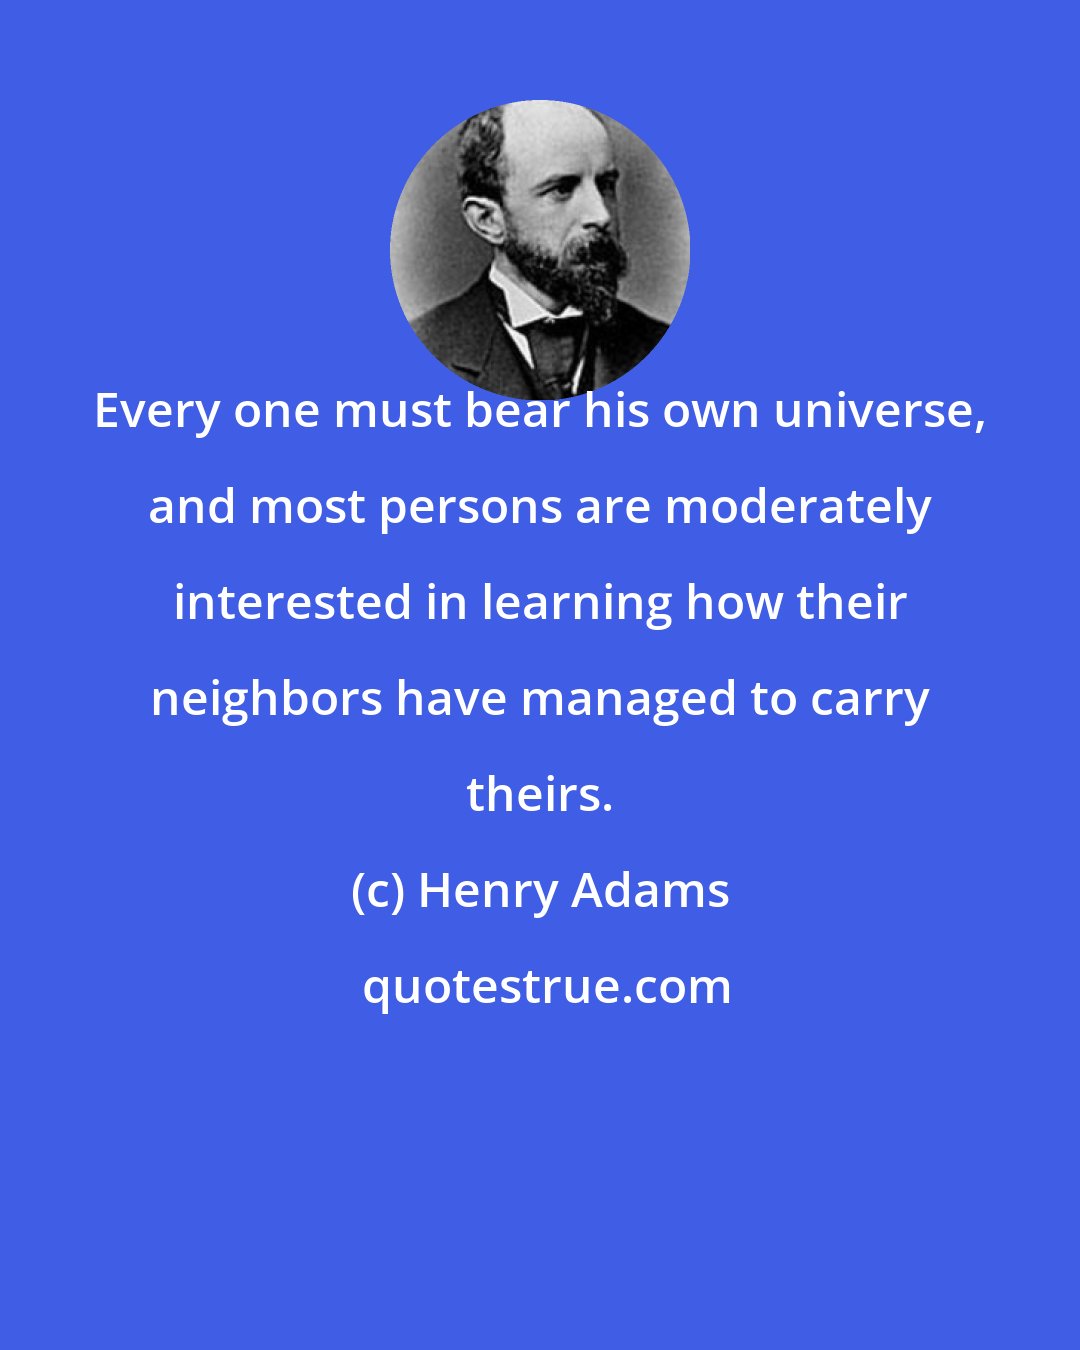 Henry Adams: Every one must bear his own universe, and most persons are moderately interested in learning how their neighbors have managed to carry theirs.